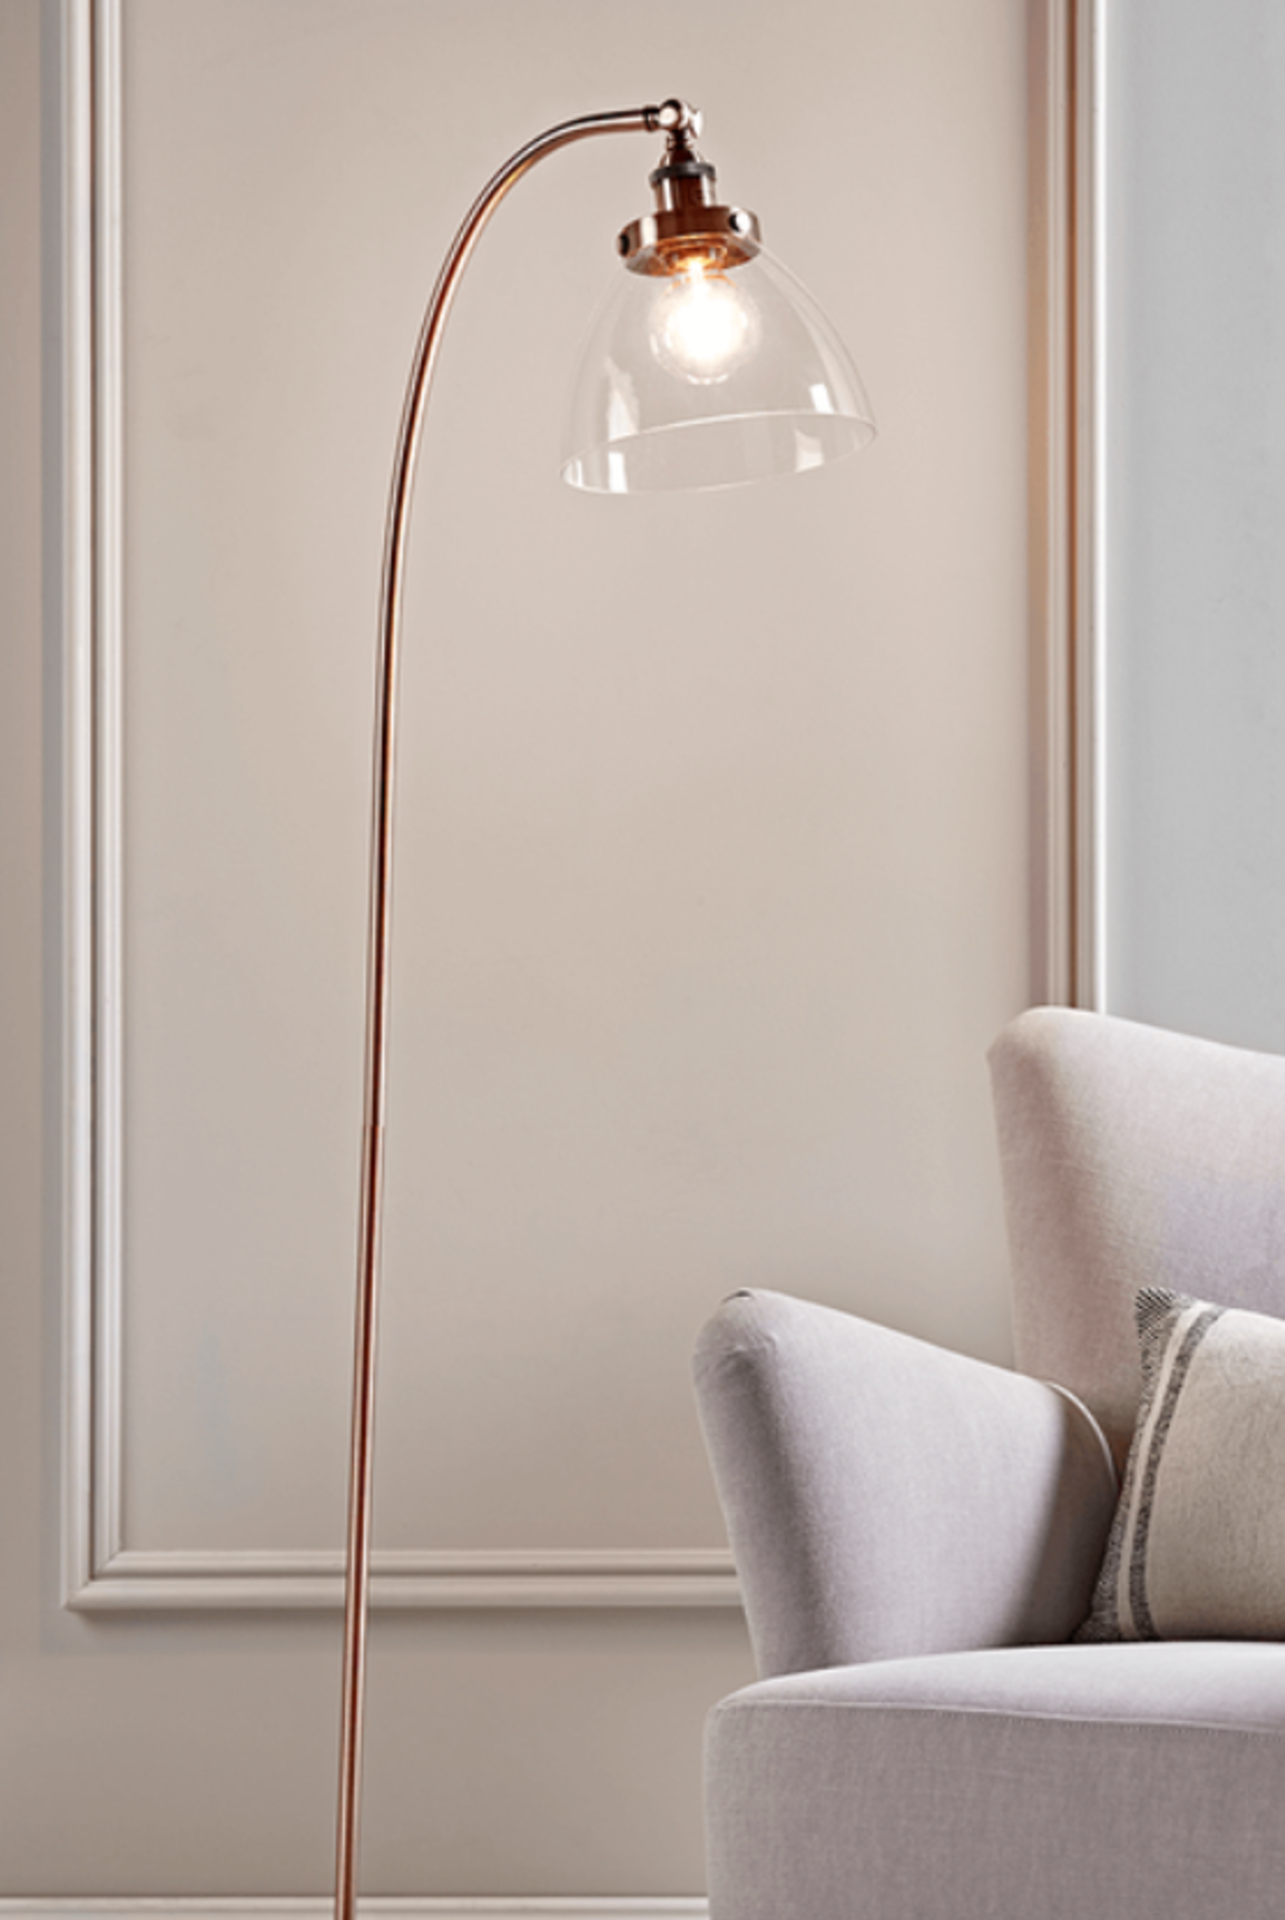 Domed Glass Floor Lamp - Copper. RRP £245.00. Complete with authentic industrial features, our